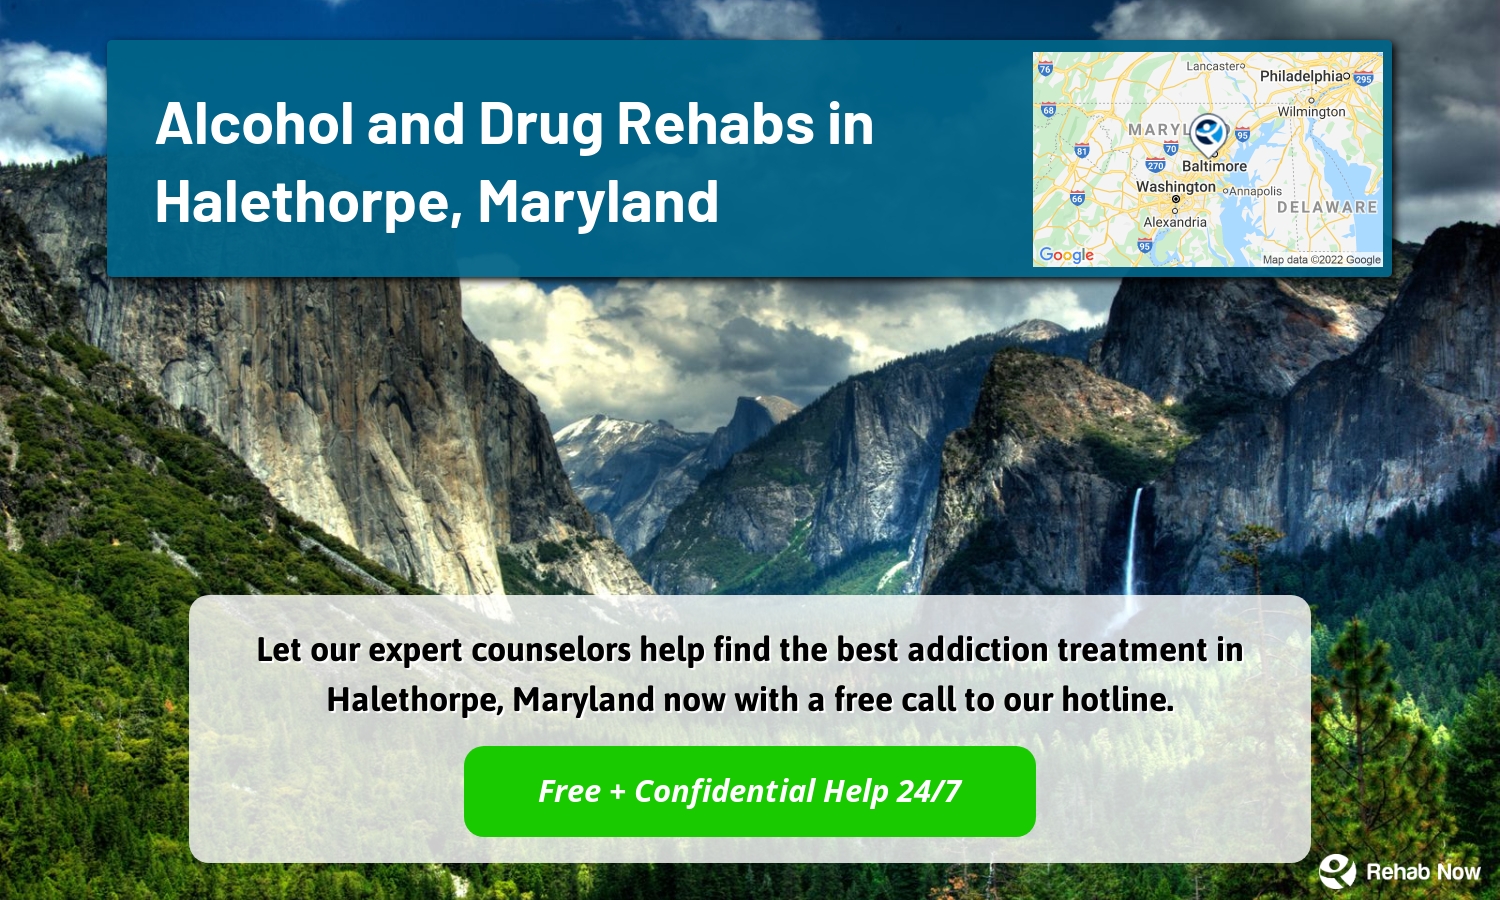 Let our expert counselors help find the best addiction treatment in Halethorpe, Maryland now with a free call to our hotline.